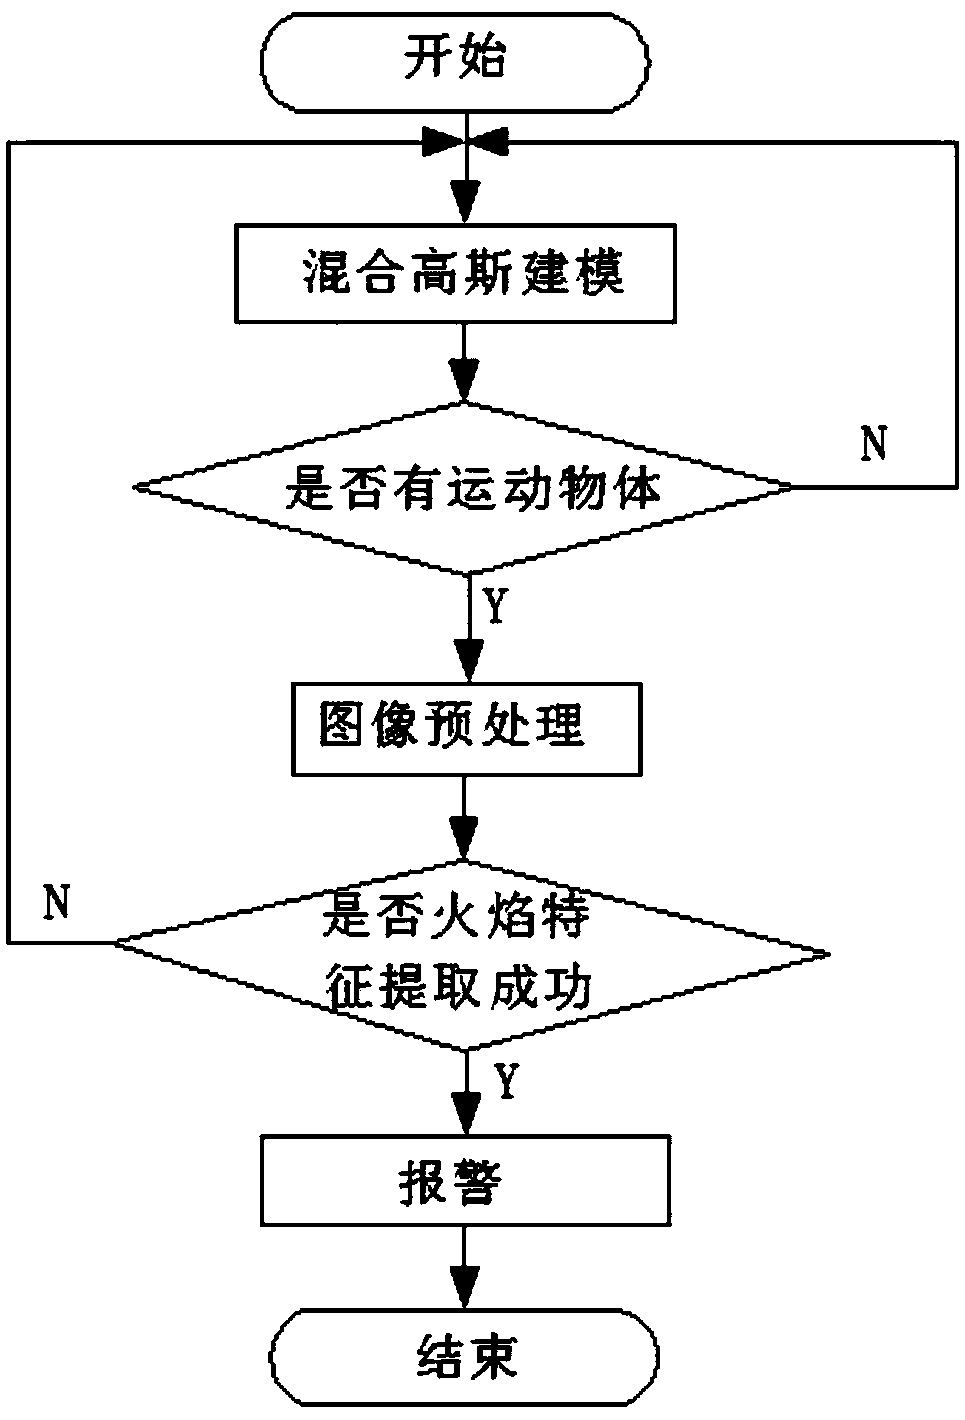 Machine vision based forest fire preventive early warning system and method thereof